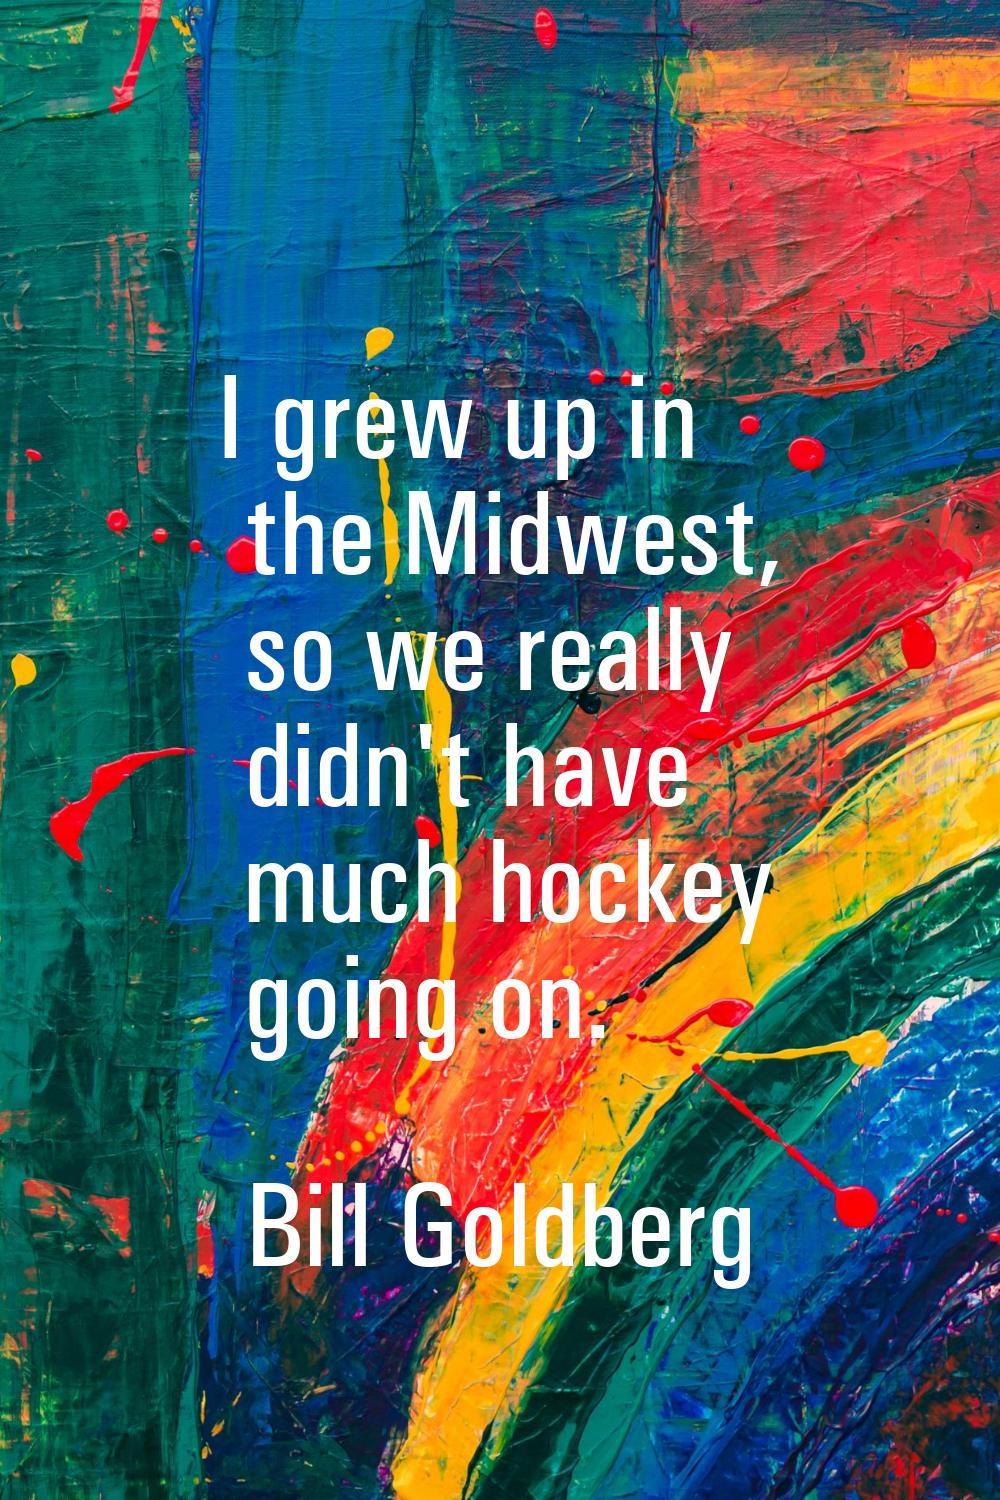 I grew up in the Midwest, so we really didn't have much hockey going on.